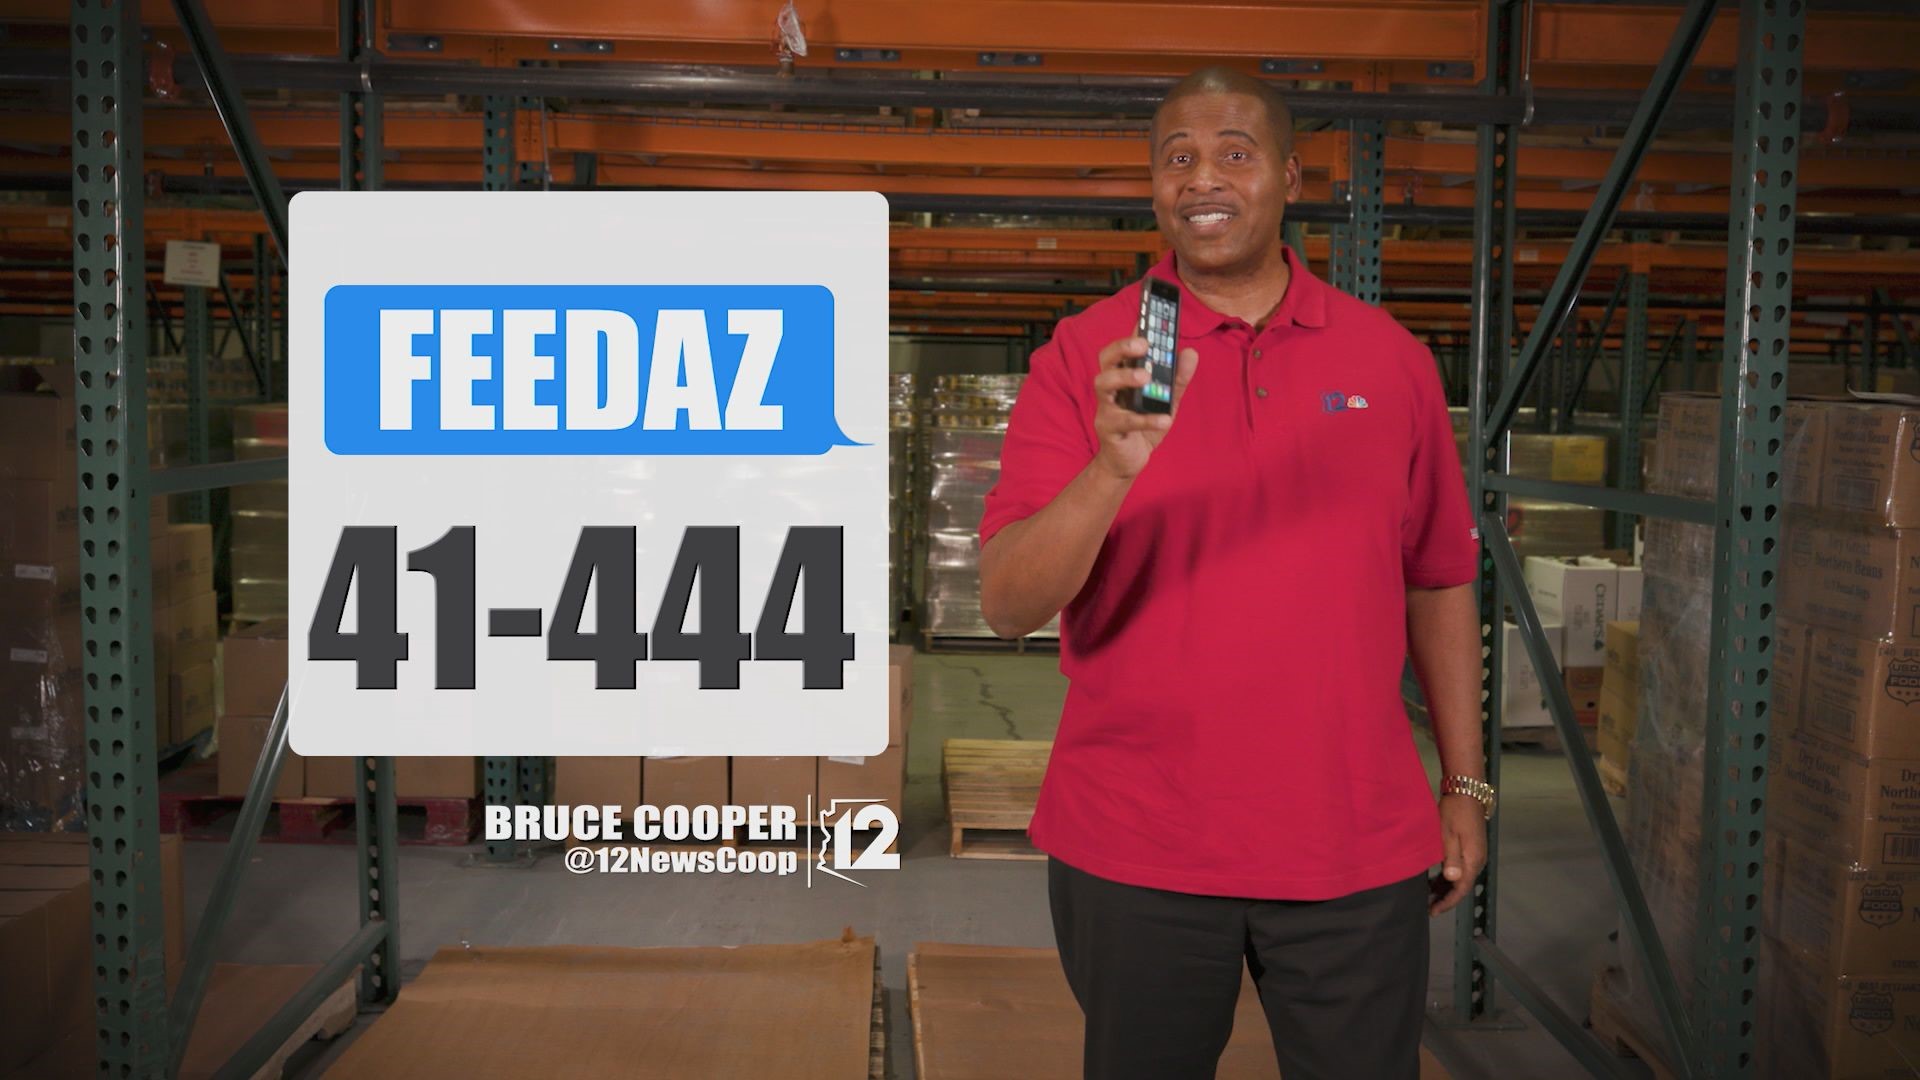 Bruce Cooper and Lindsay Riley need your help to make it a Summer of a Million Meals! Text "FeedAZ" to 41444 to get the link to donate.